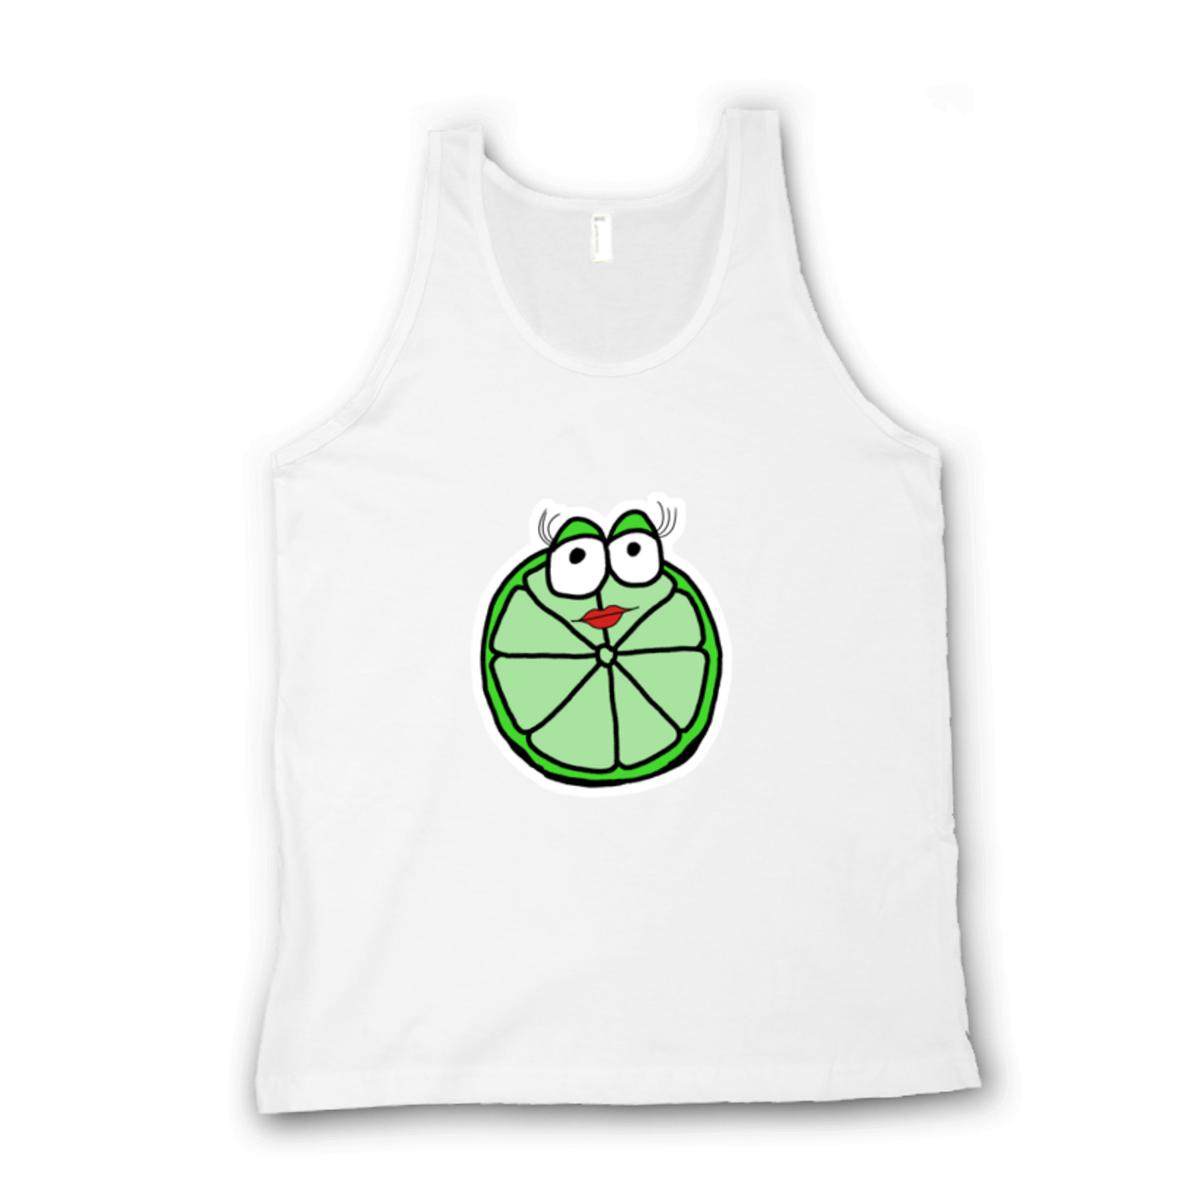 Lime Unisex Tank Top Small white